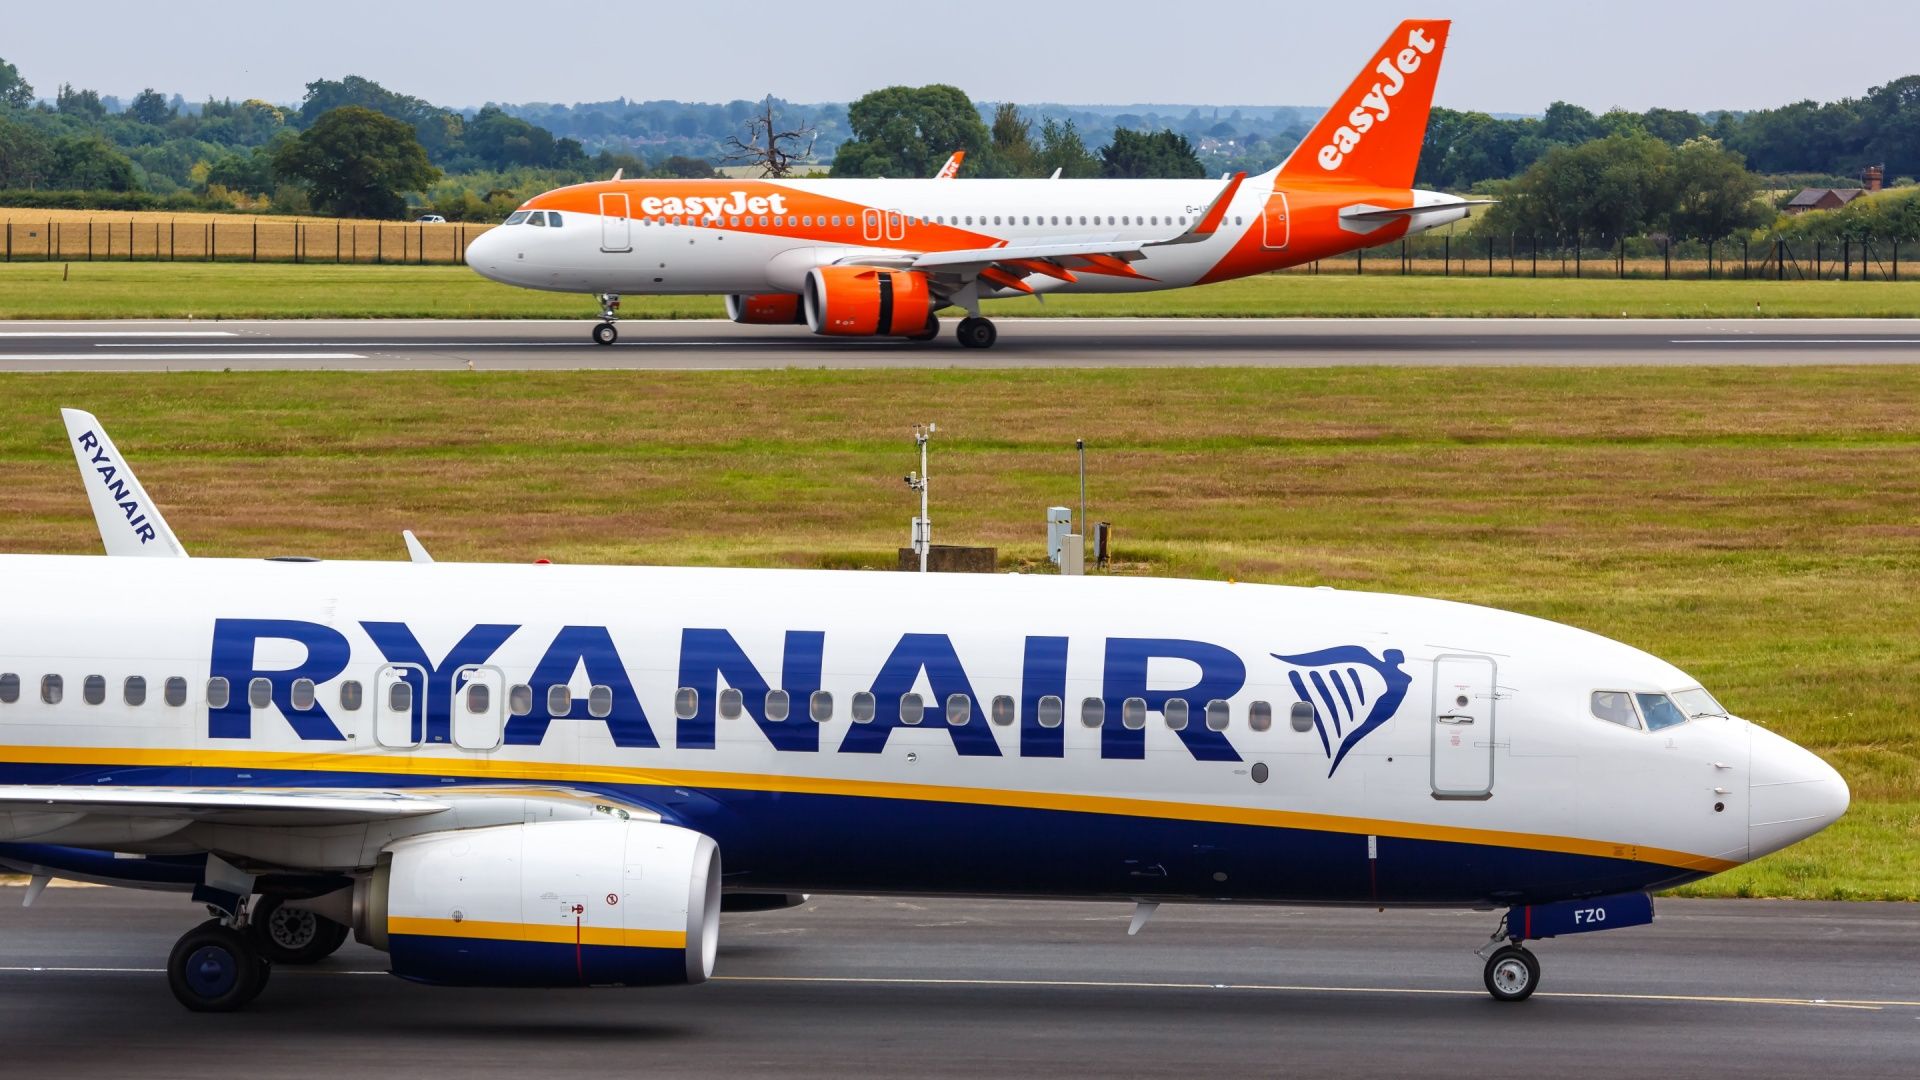 Ryanair and easyJet aircraft on an airport apron.